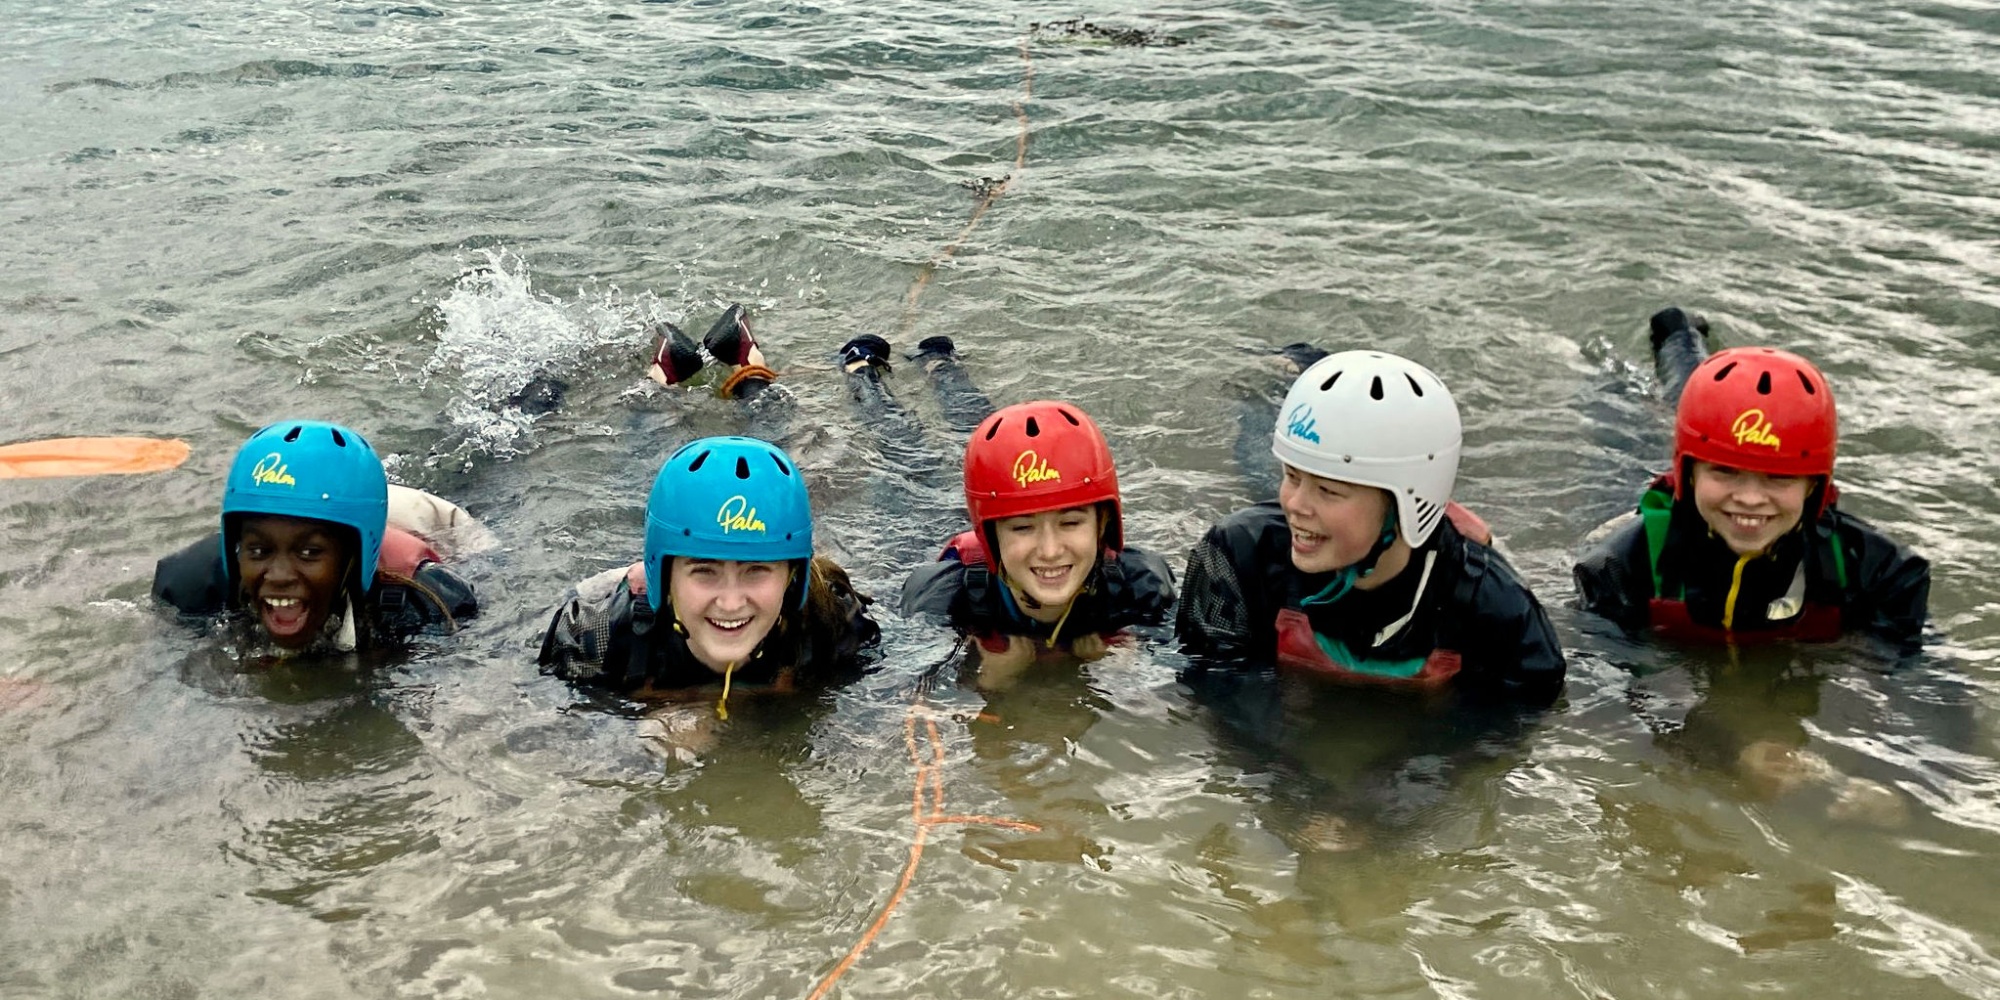 Students on watersports trip.